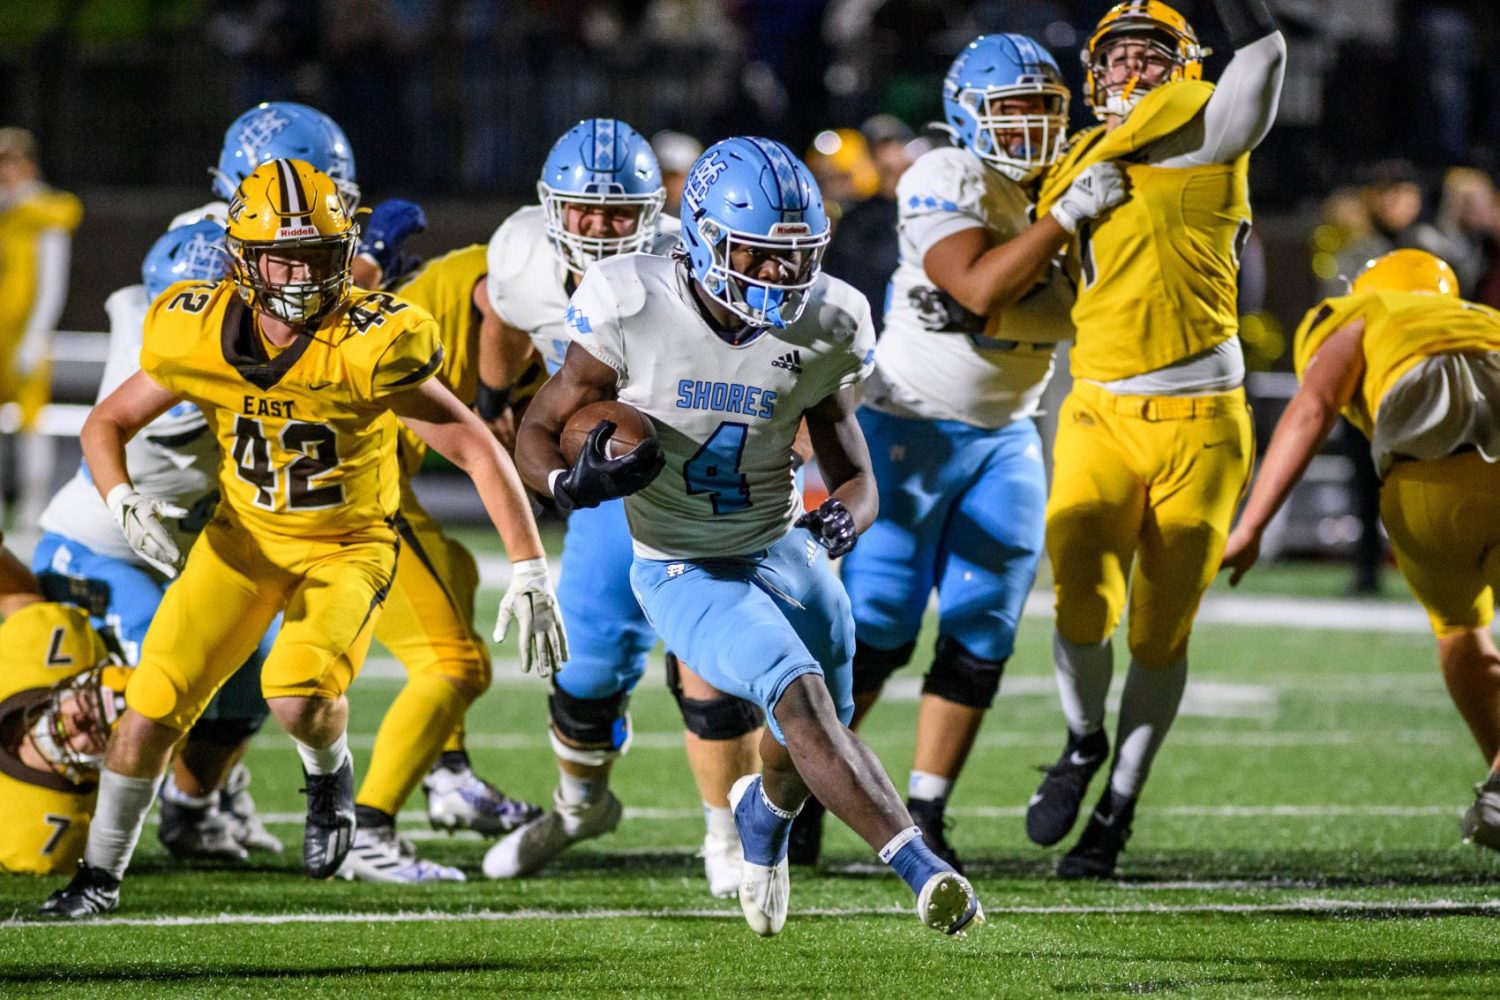 Mona Shores nipped in overtime by league foe Zeeland East